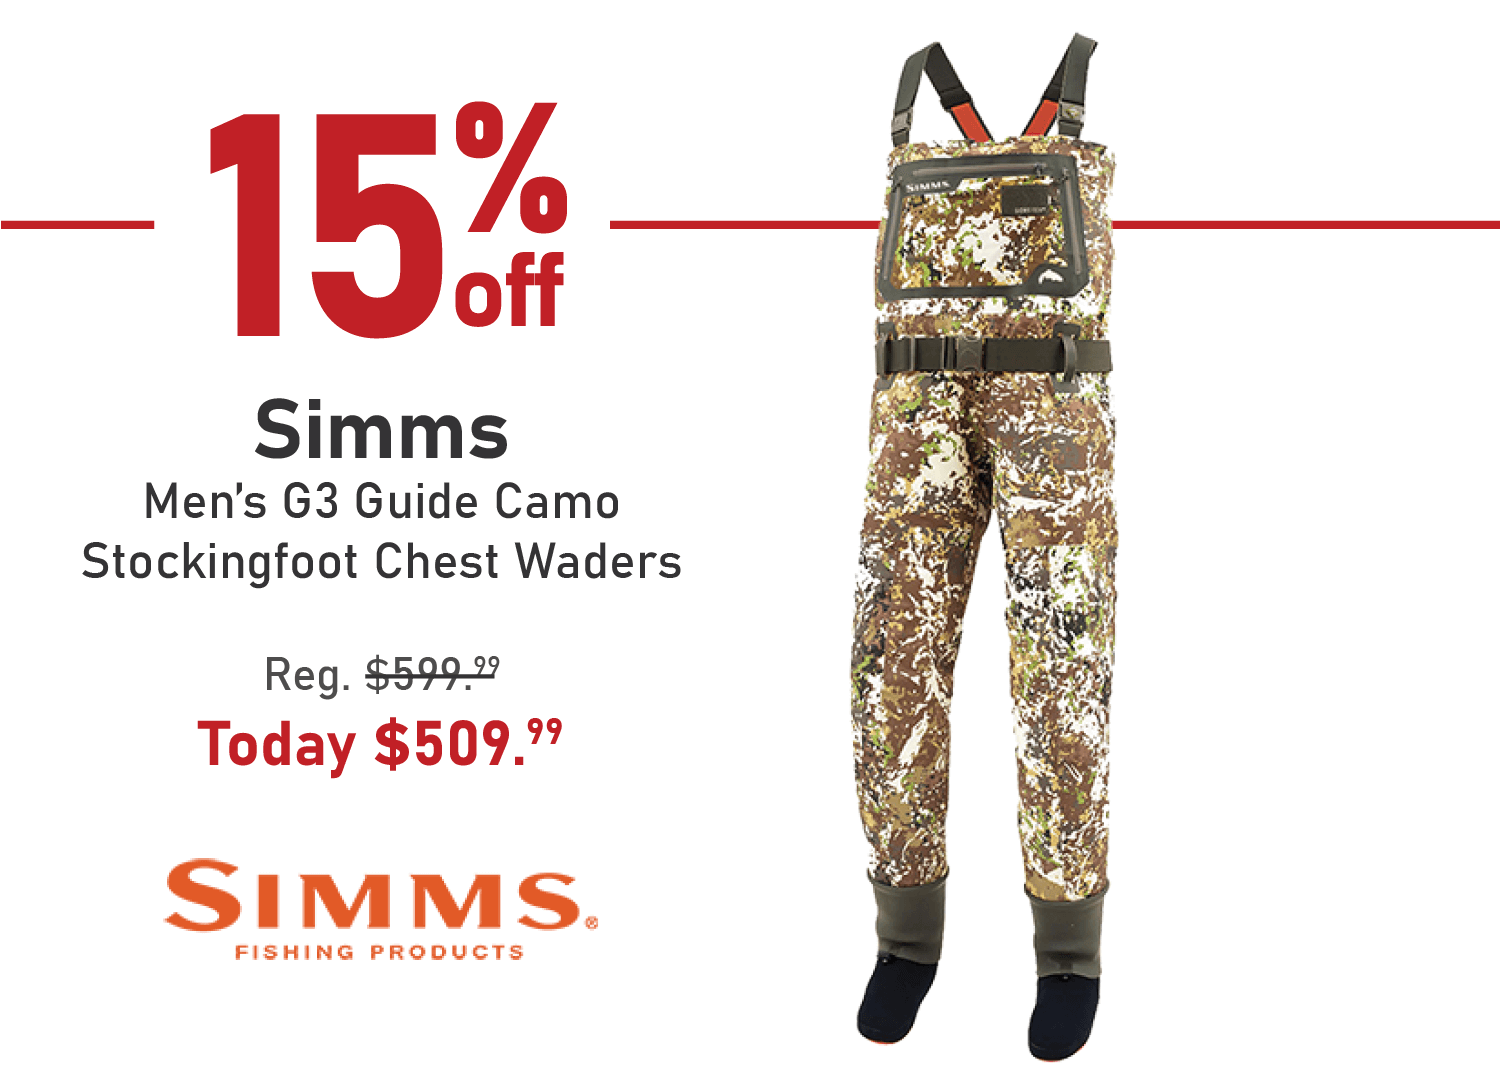 Save 15% on the Simms Men's G3 Guide Camo Stockingfoot Chest Waders